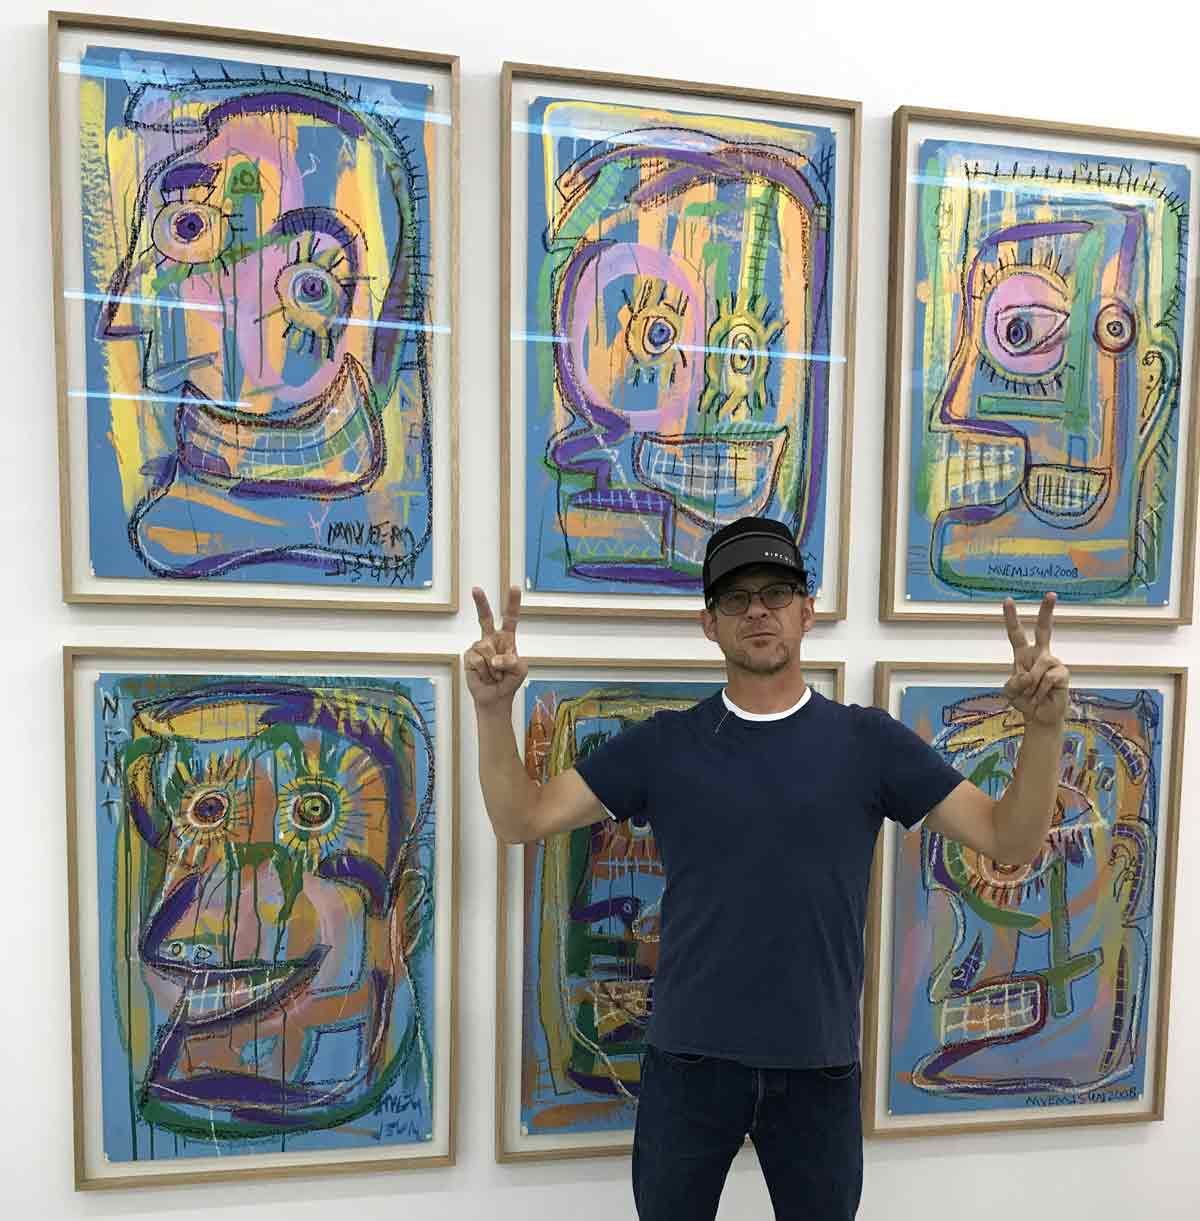 Jason Newsted in front of his works at Frame art fair Photo courtesy of 55Bellechasse gallery